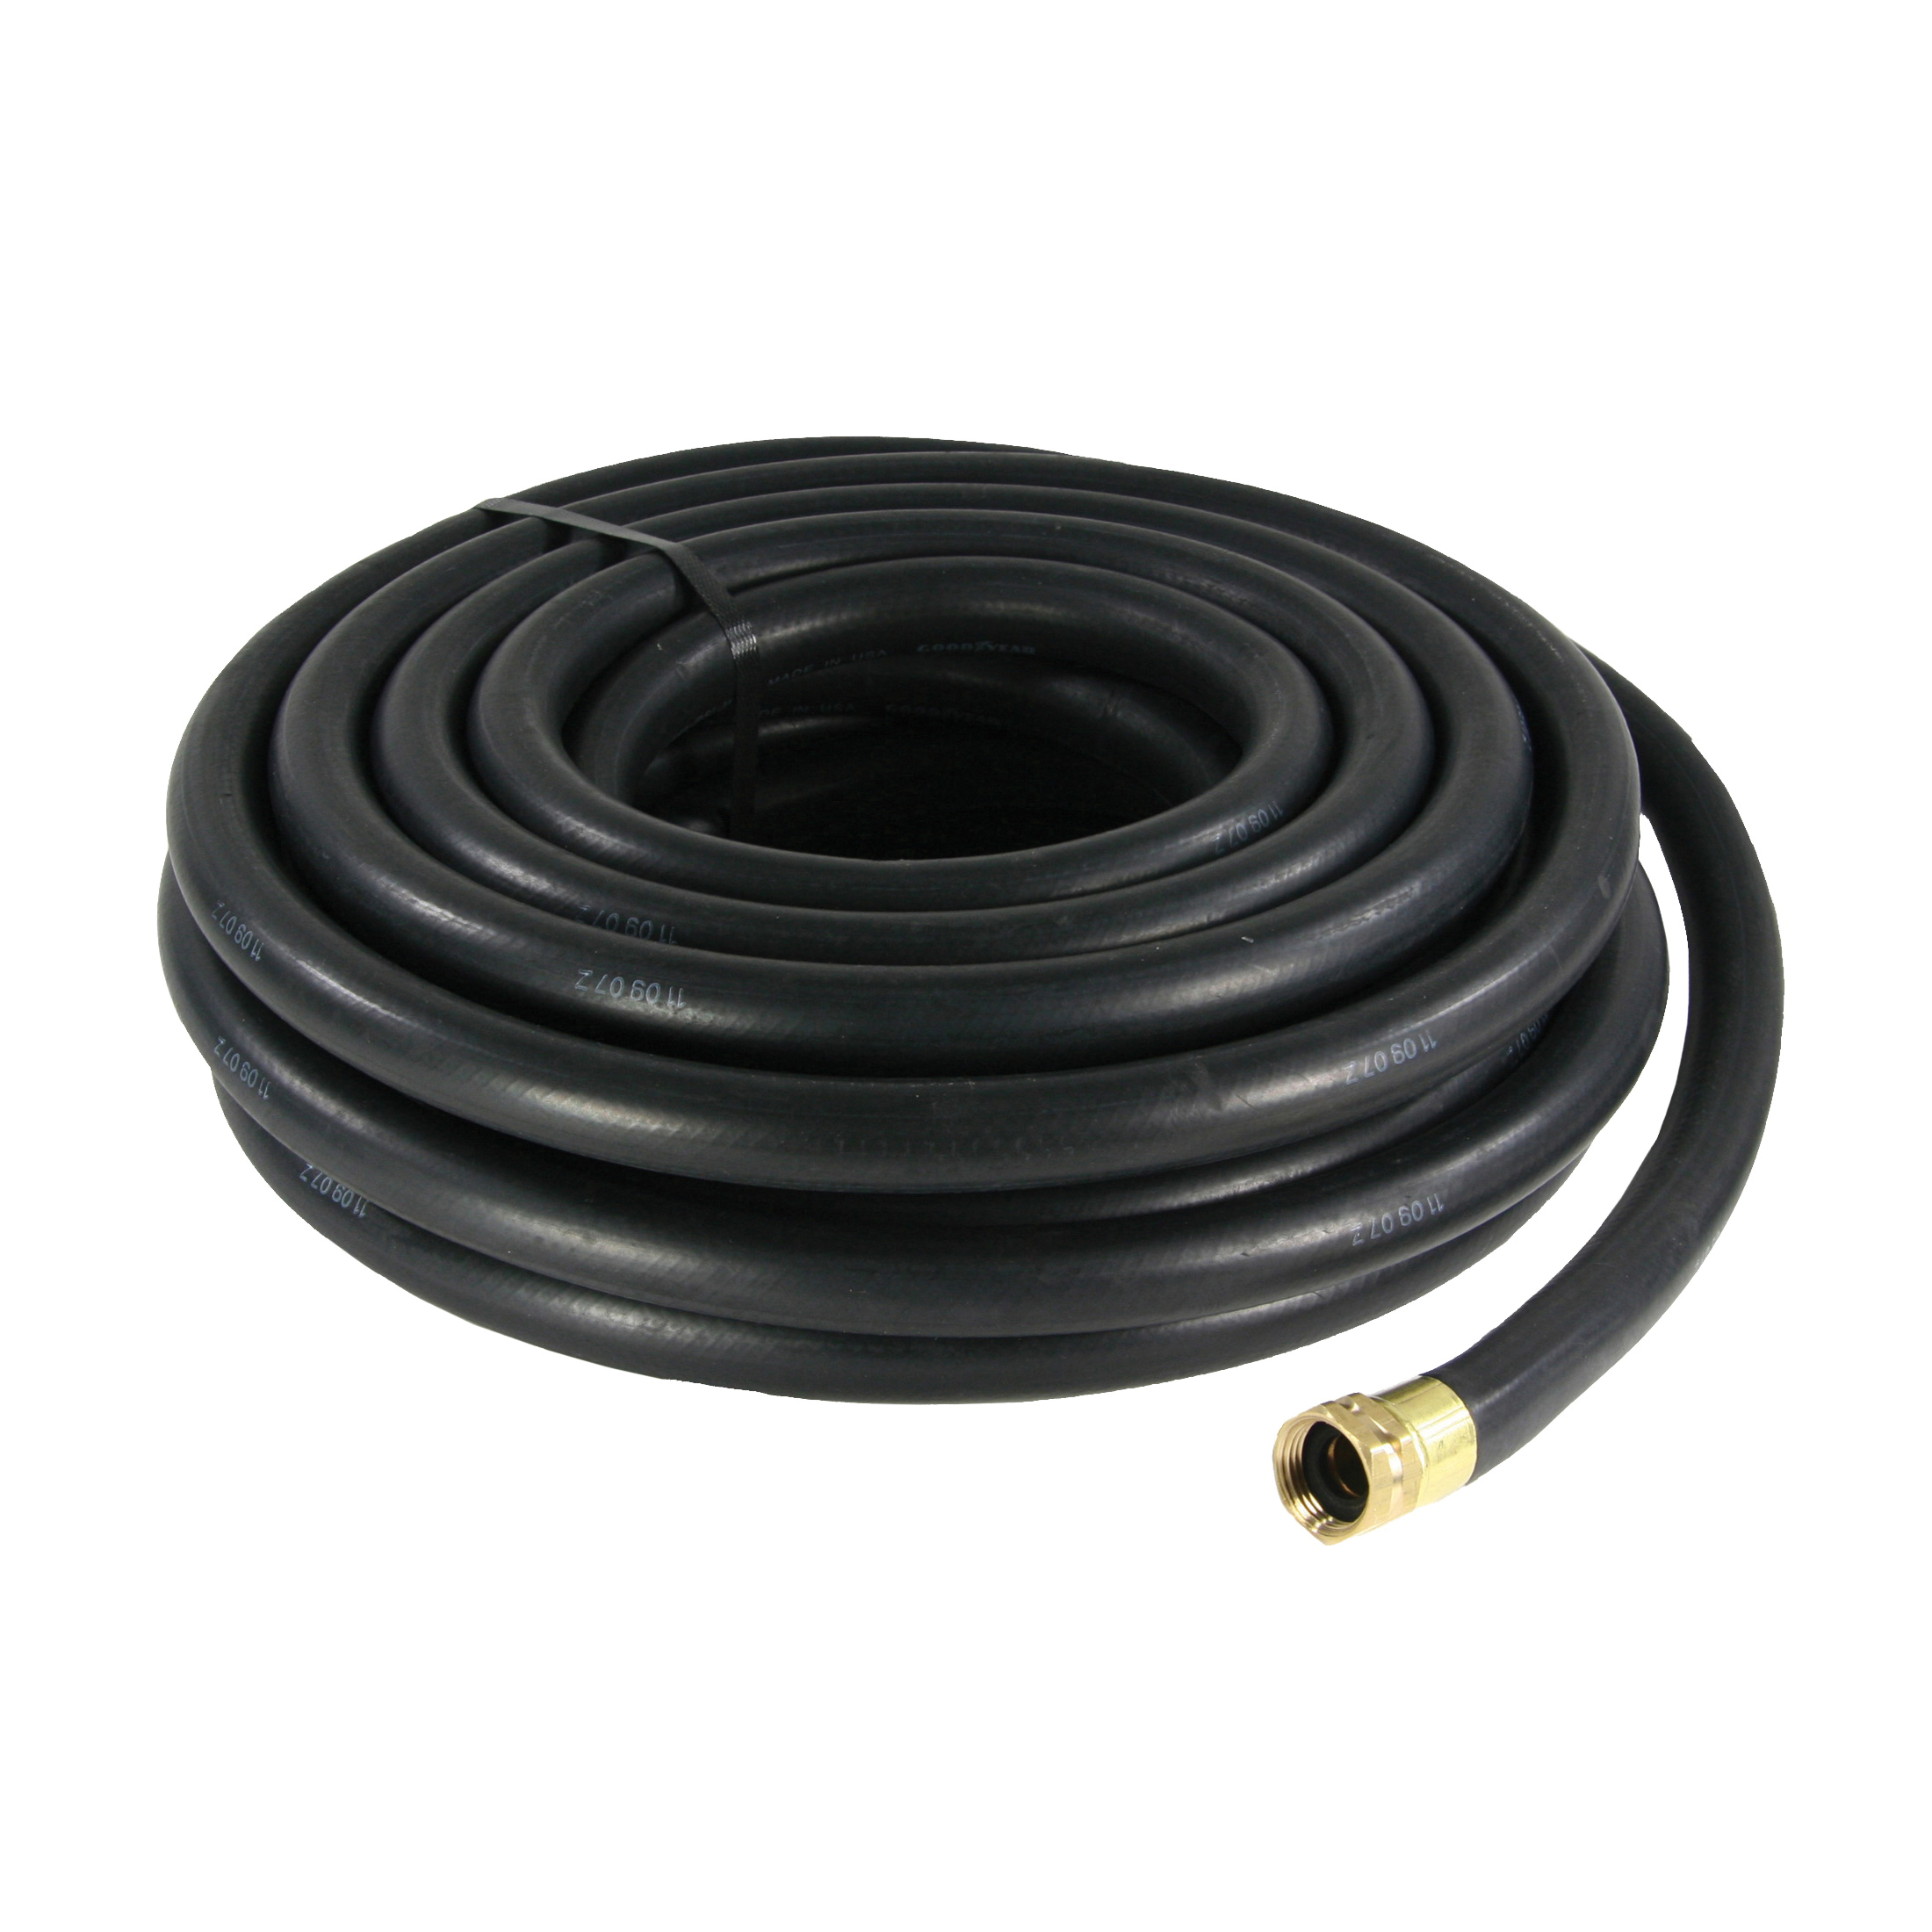 1112-0750-50 Water Hose Assembly Female x Male, 50 ft L, Female x Male, Rubber, Black